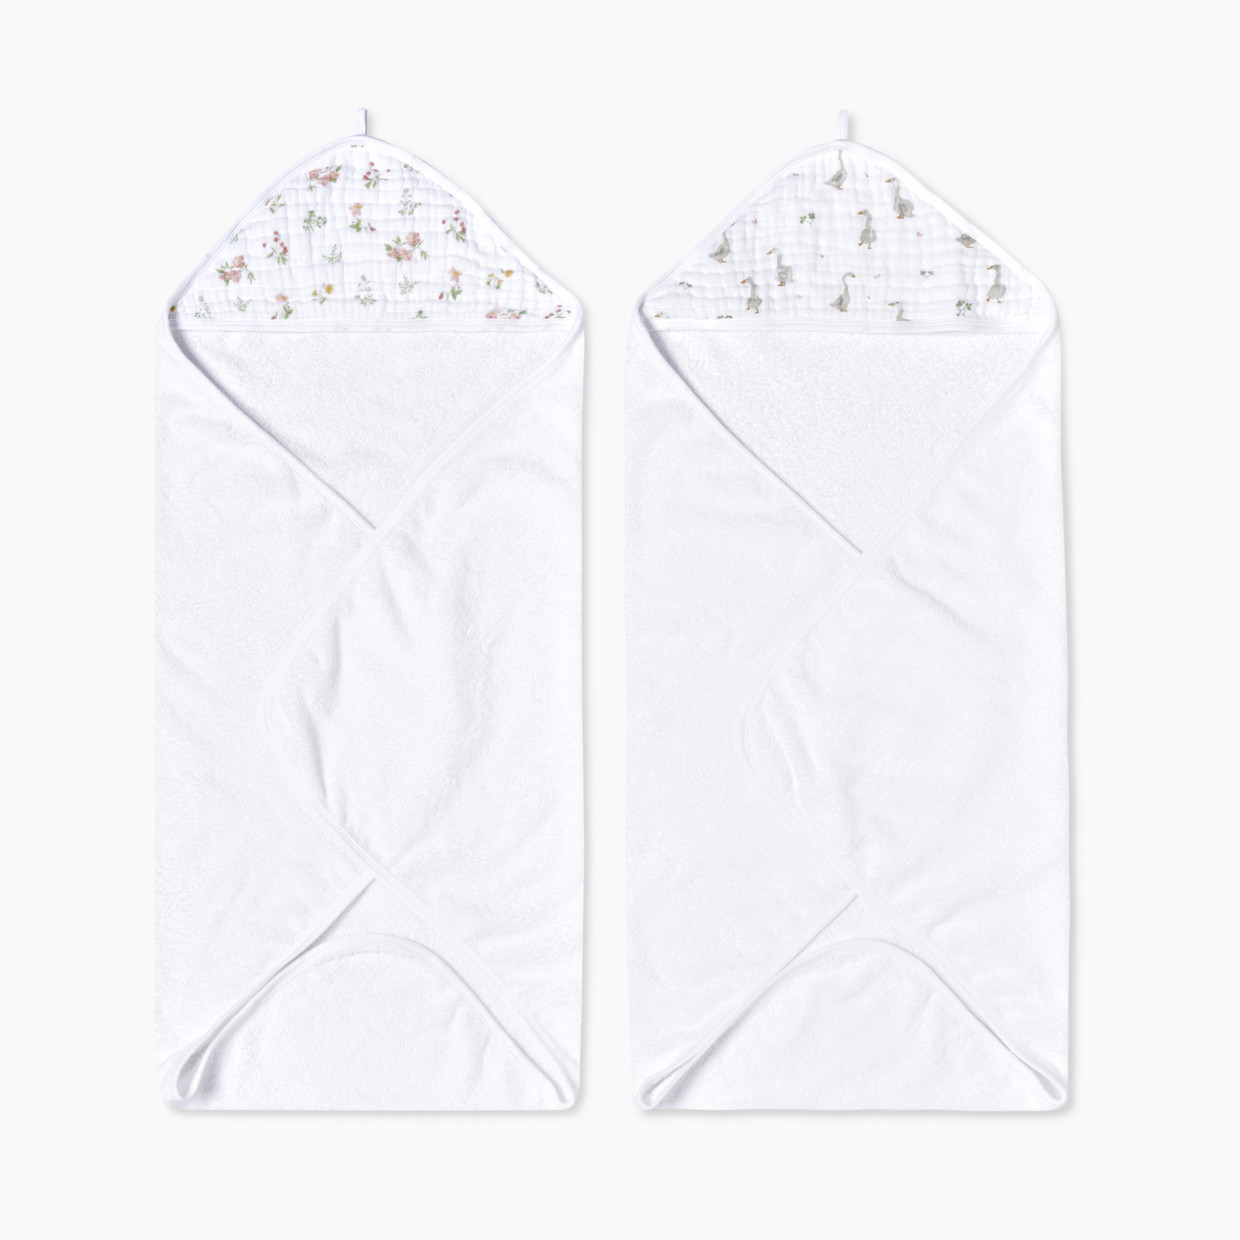 Aden + Anais Essentials Hooded Towels (2 Pack) - Country Floral.